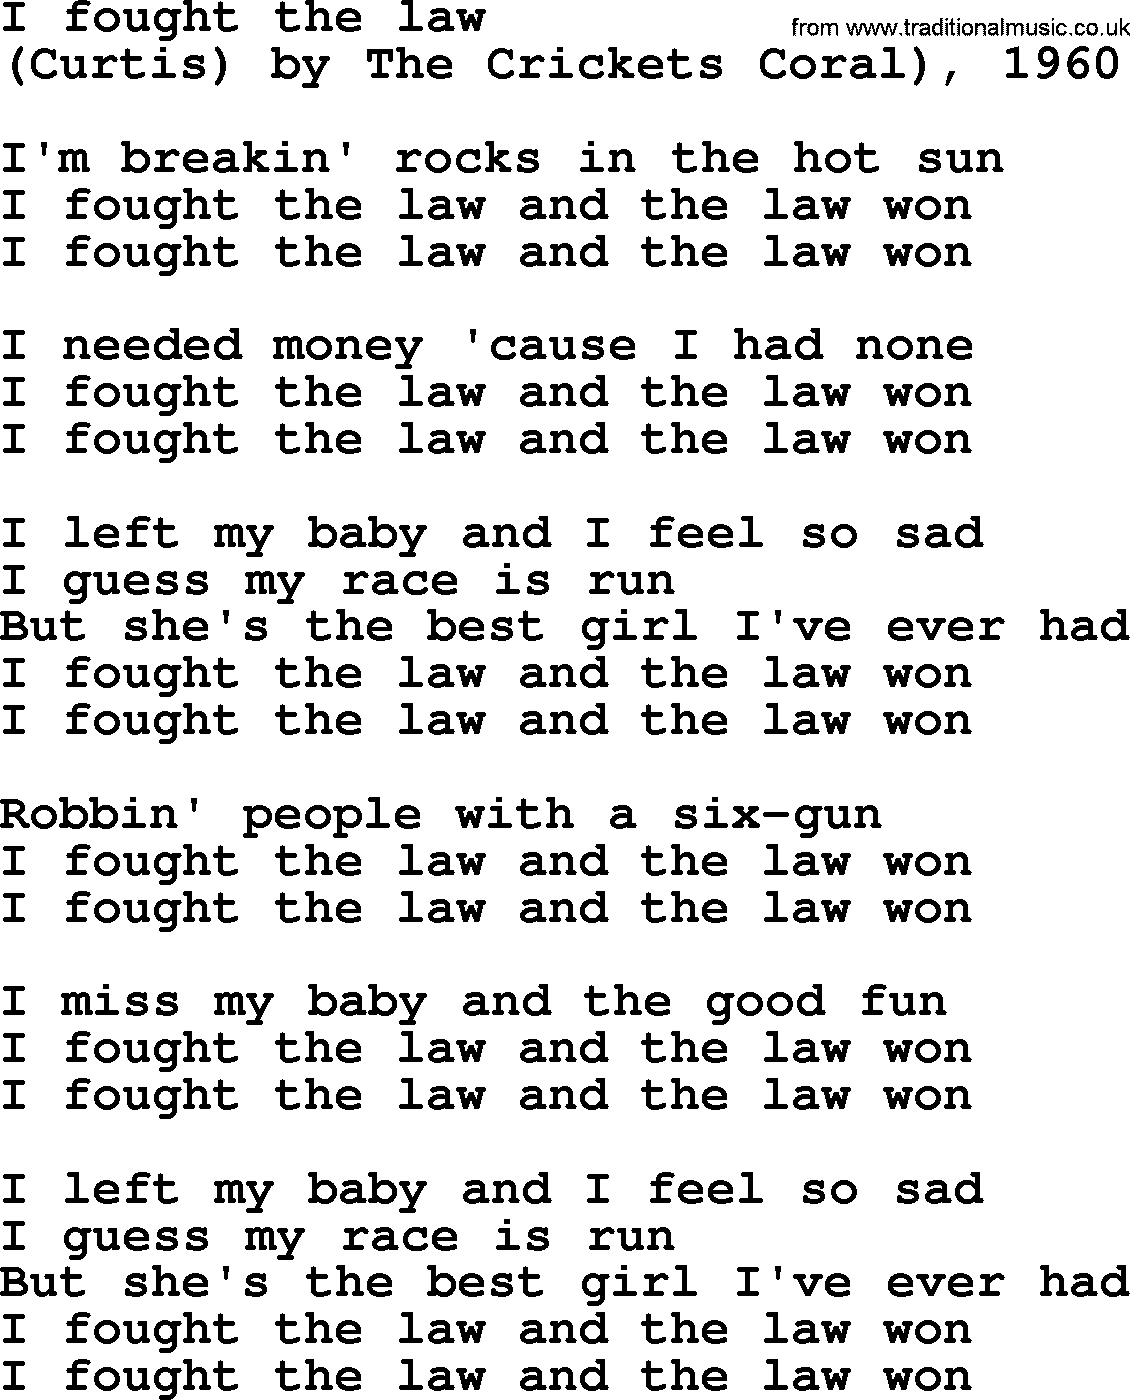 Bruce Springsteen song: I Fought The Law lyrics